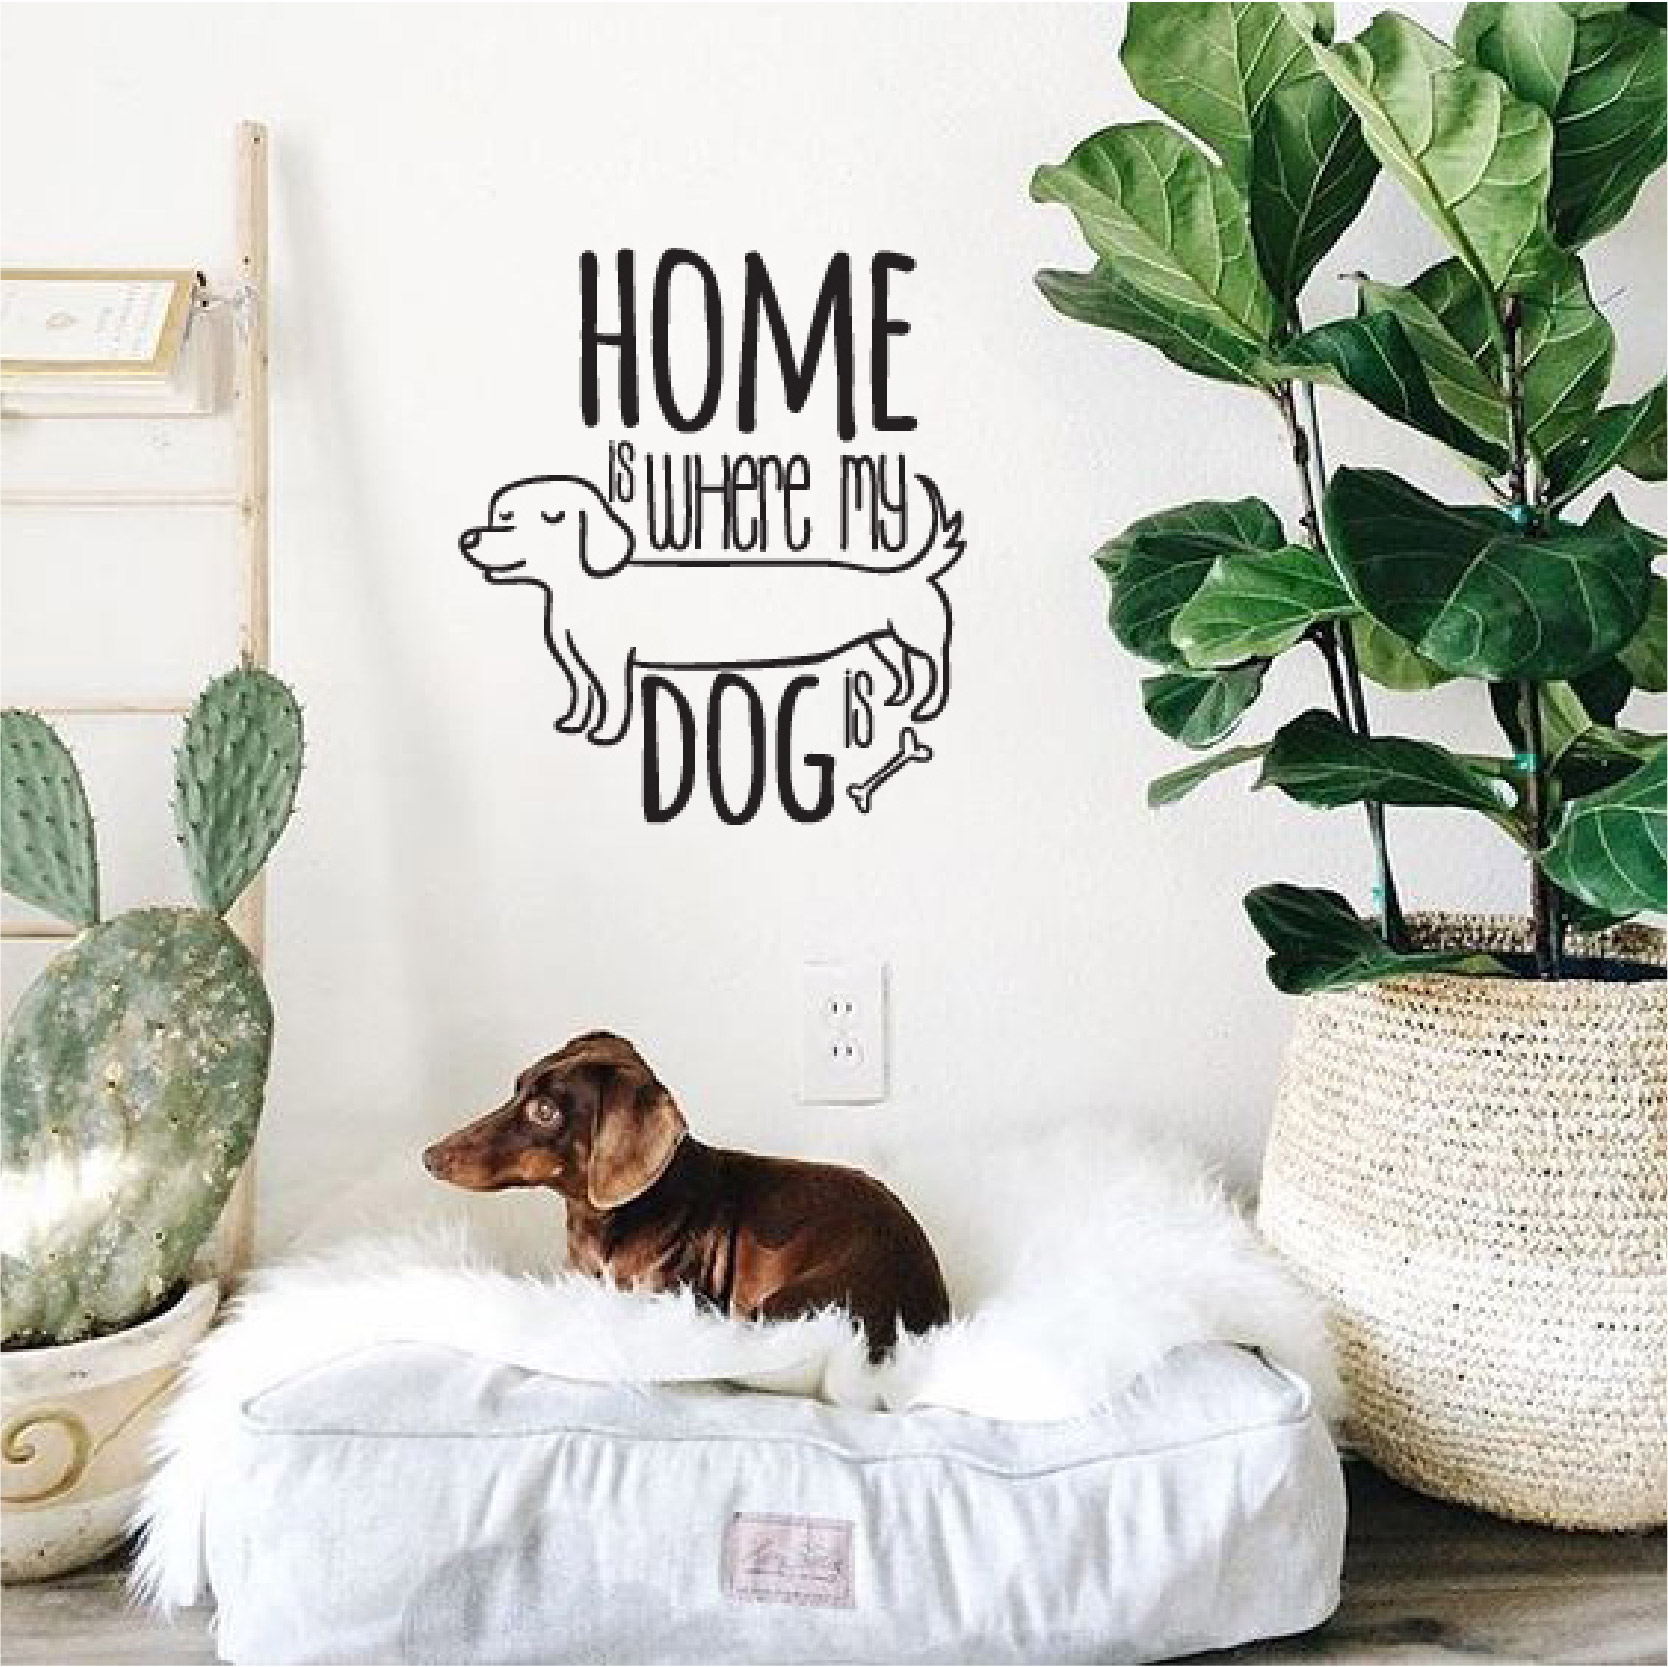 Home is where my dog is - branco